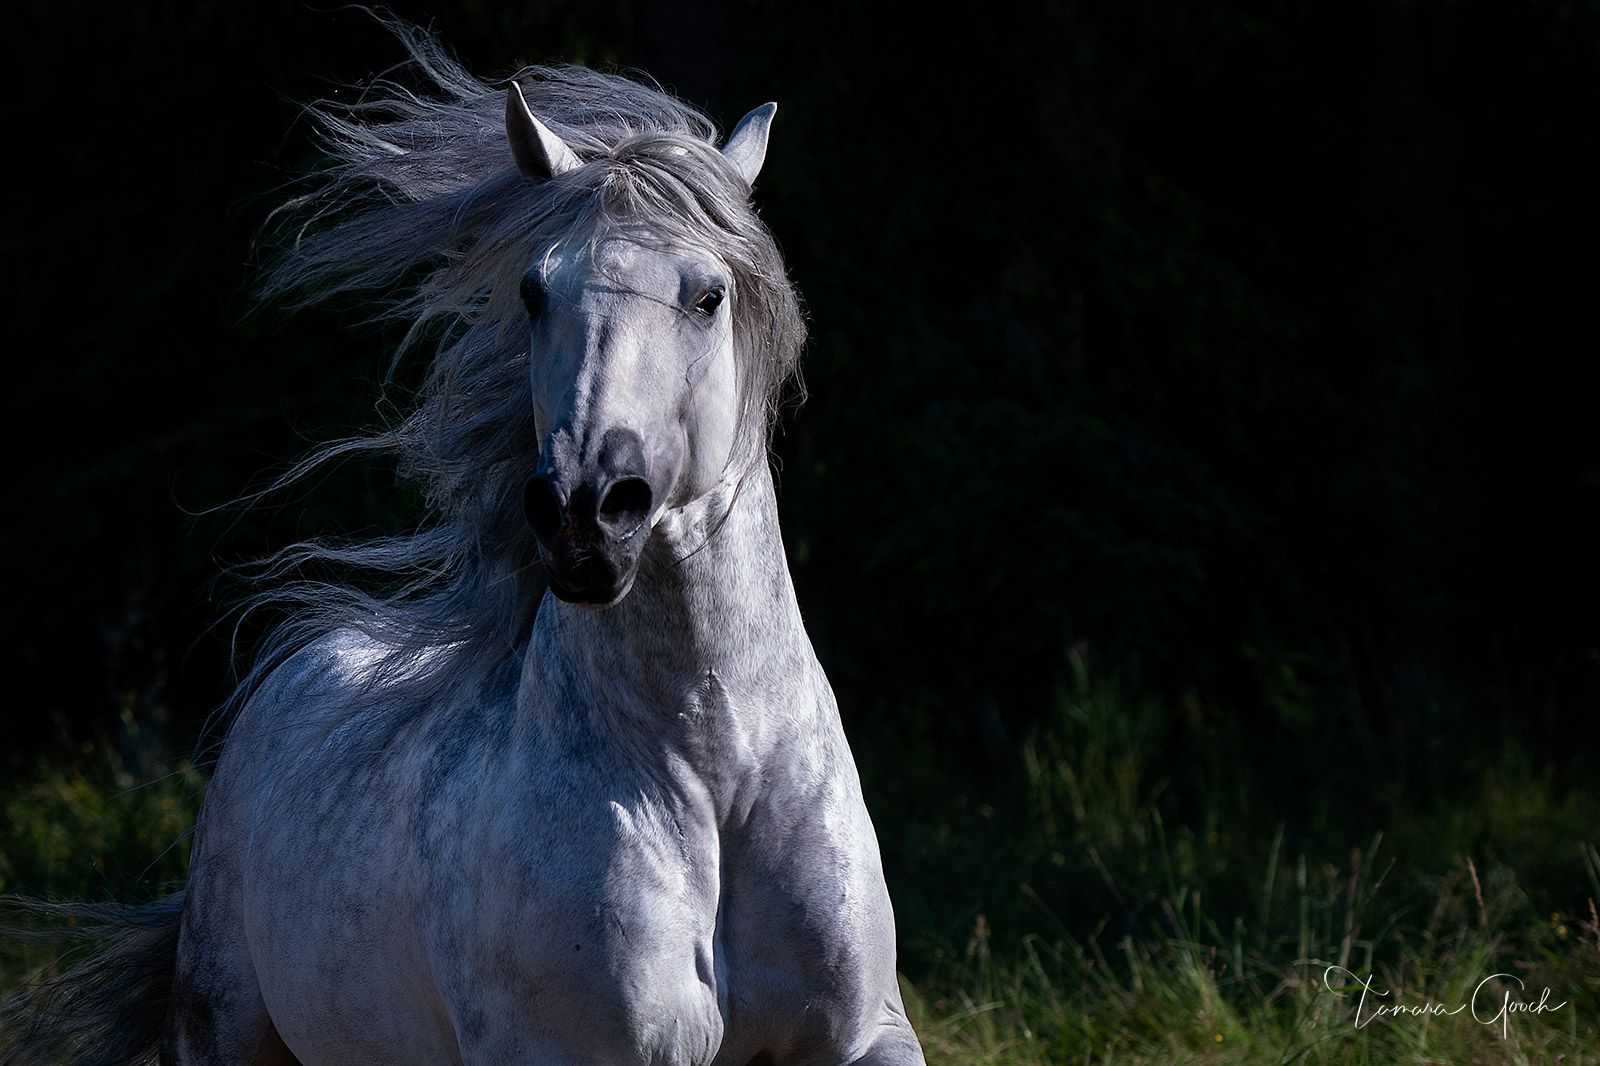 A photograph of a gray Andalusian horse running with its mane flying.